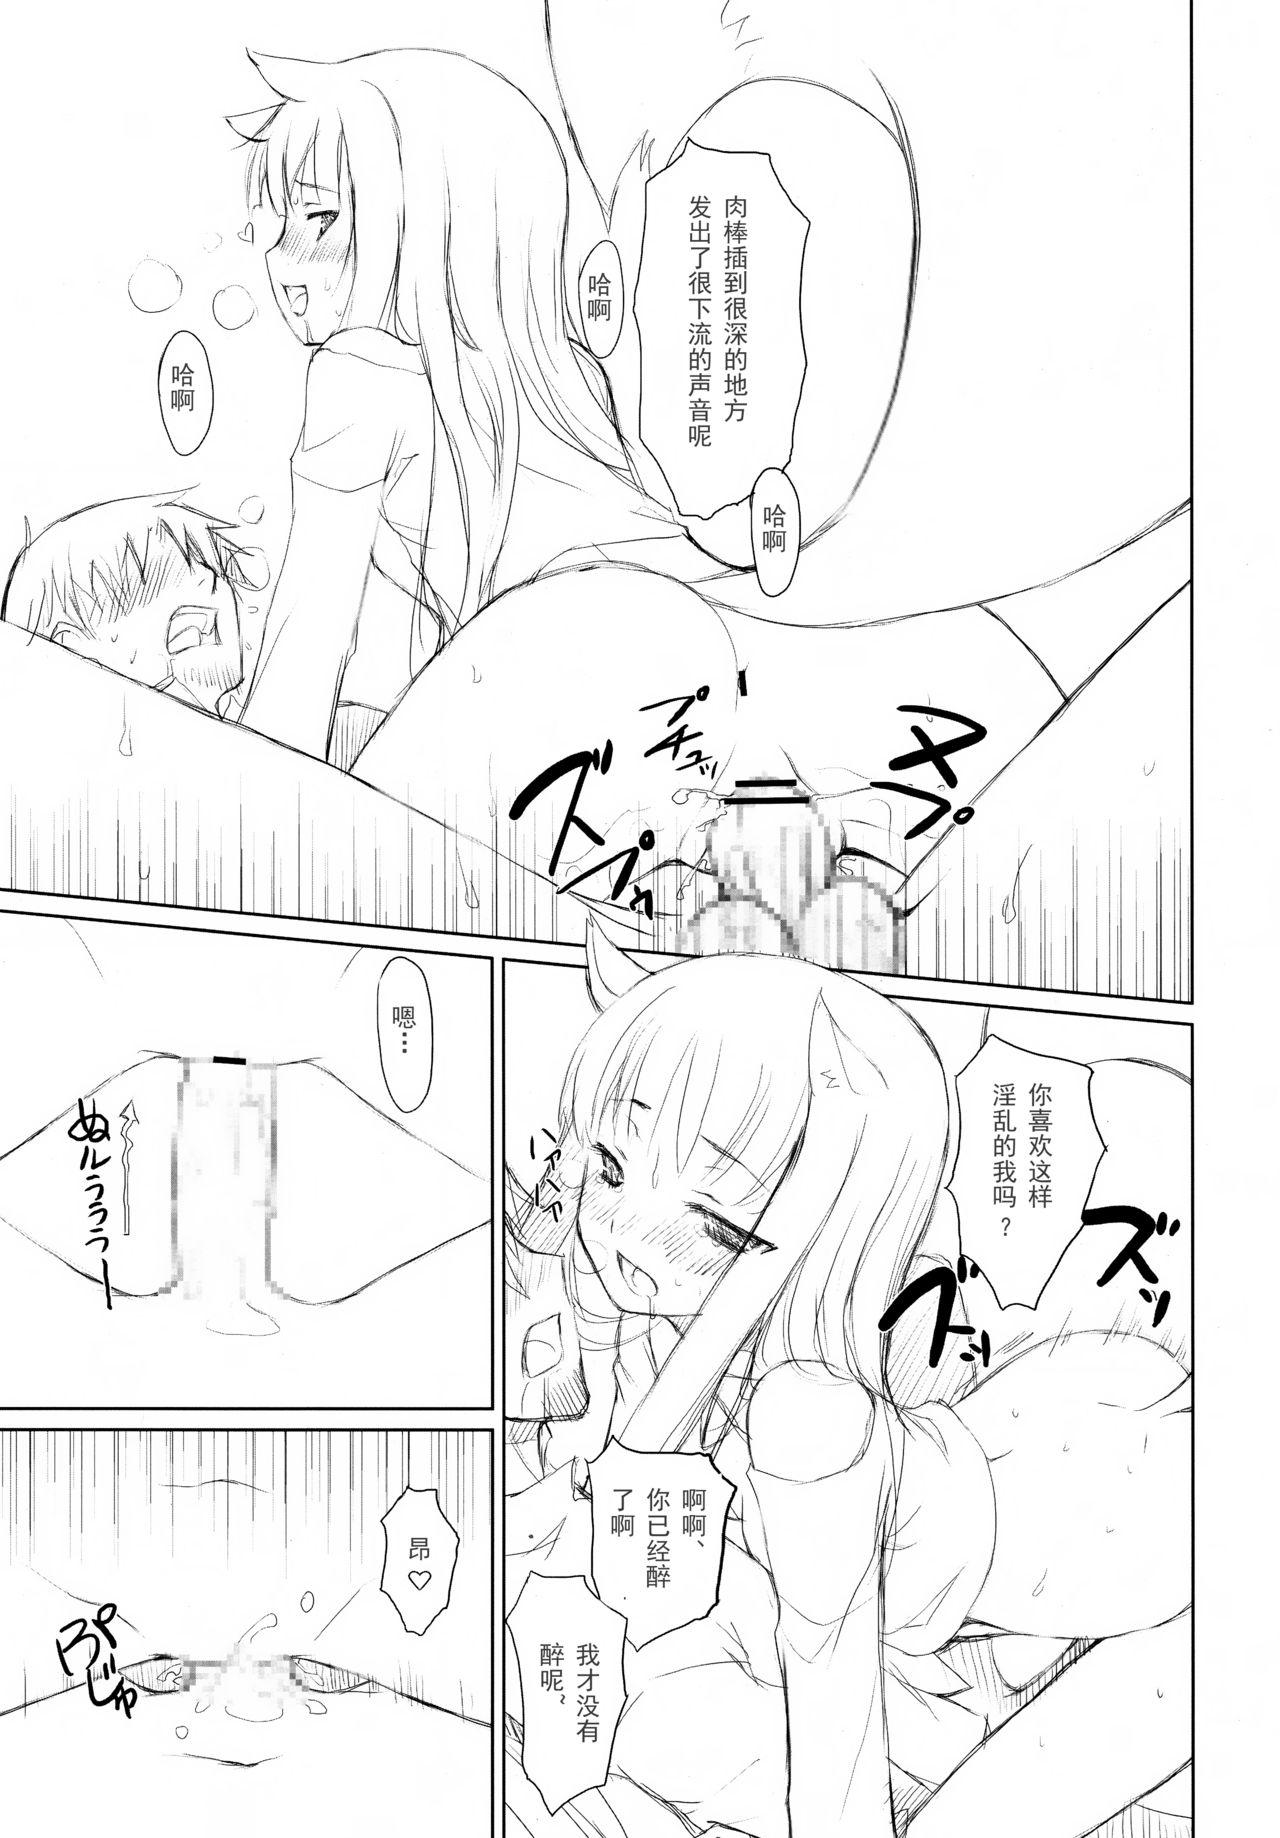 Gape Ookami to Gekishinryou - Spice and wolf Foot Fetish - Page 12